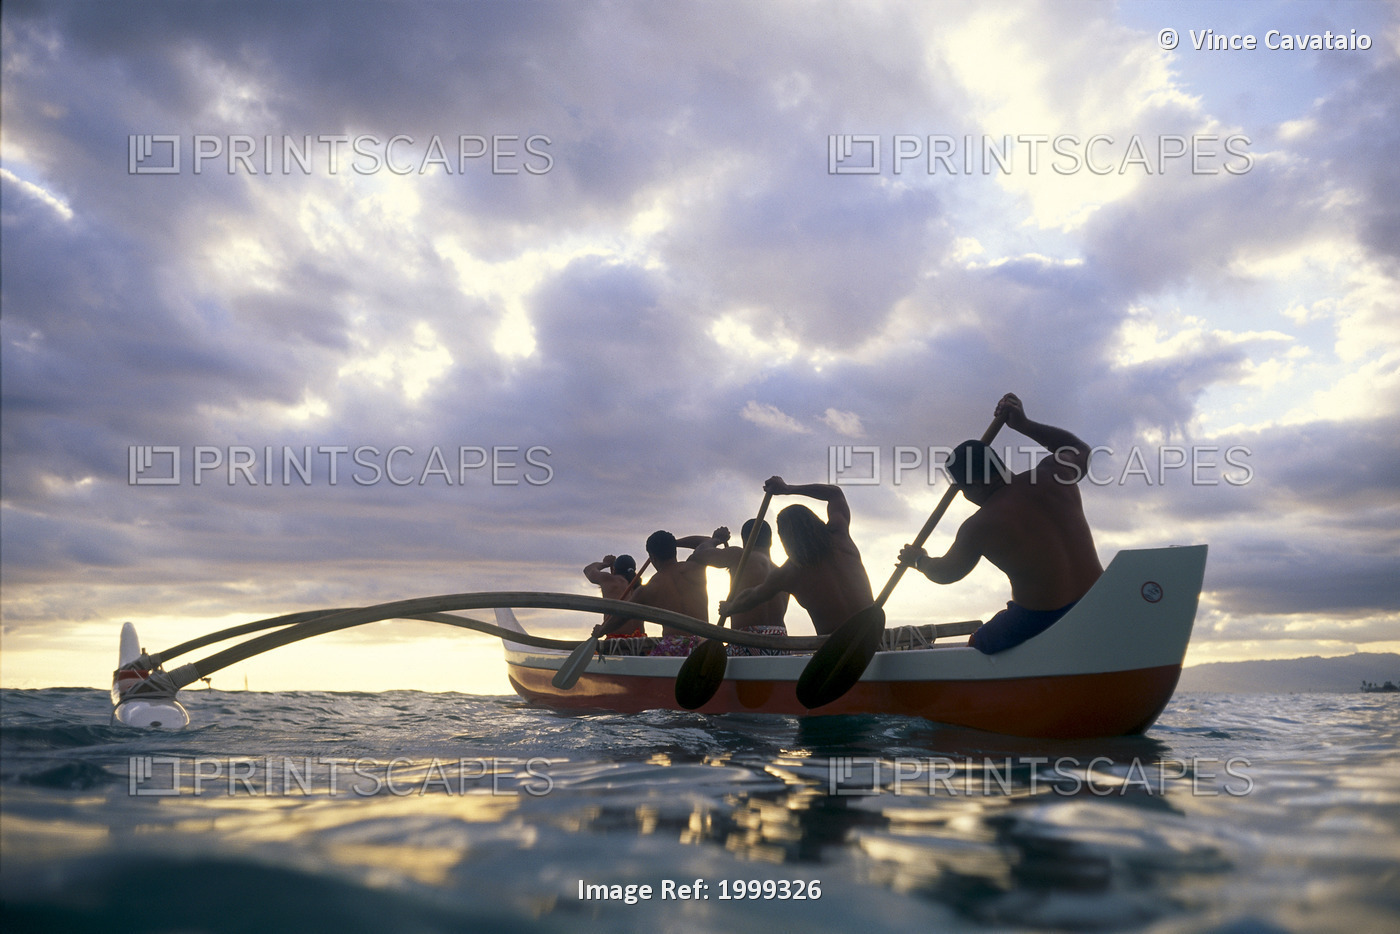 Hawaii, Outrigger Canoe Men Paddle Into Sunset, Dramatic Clouds, Reflections